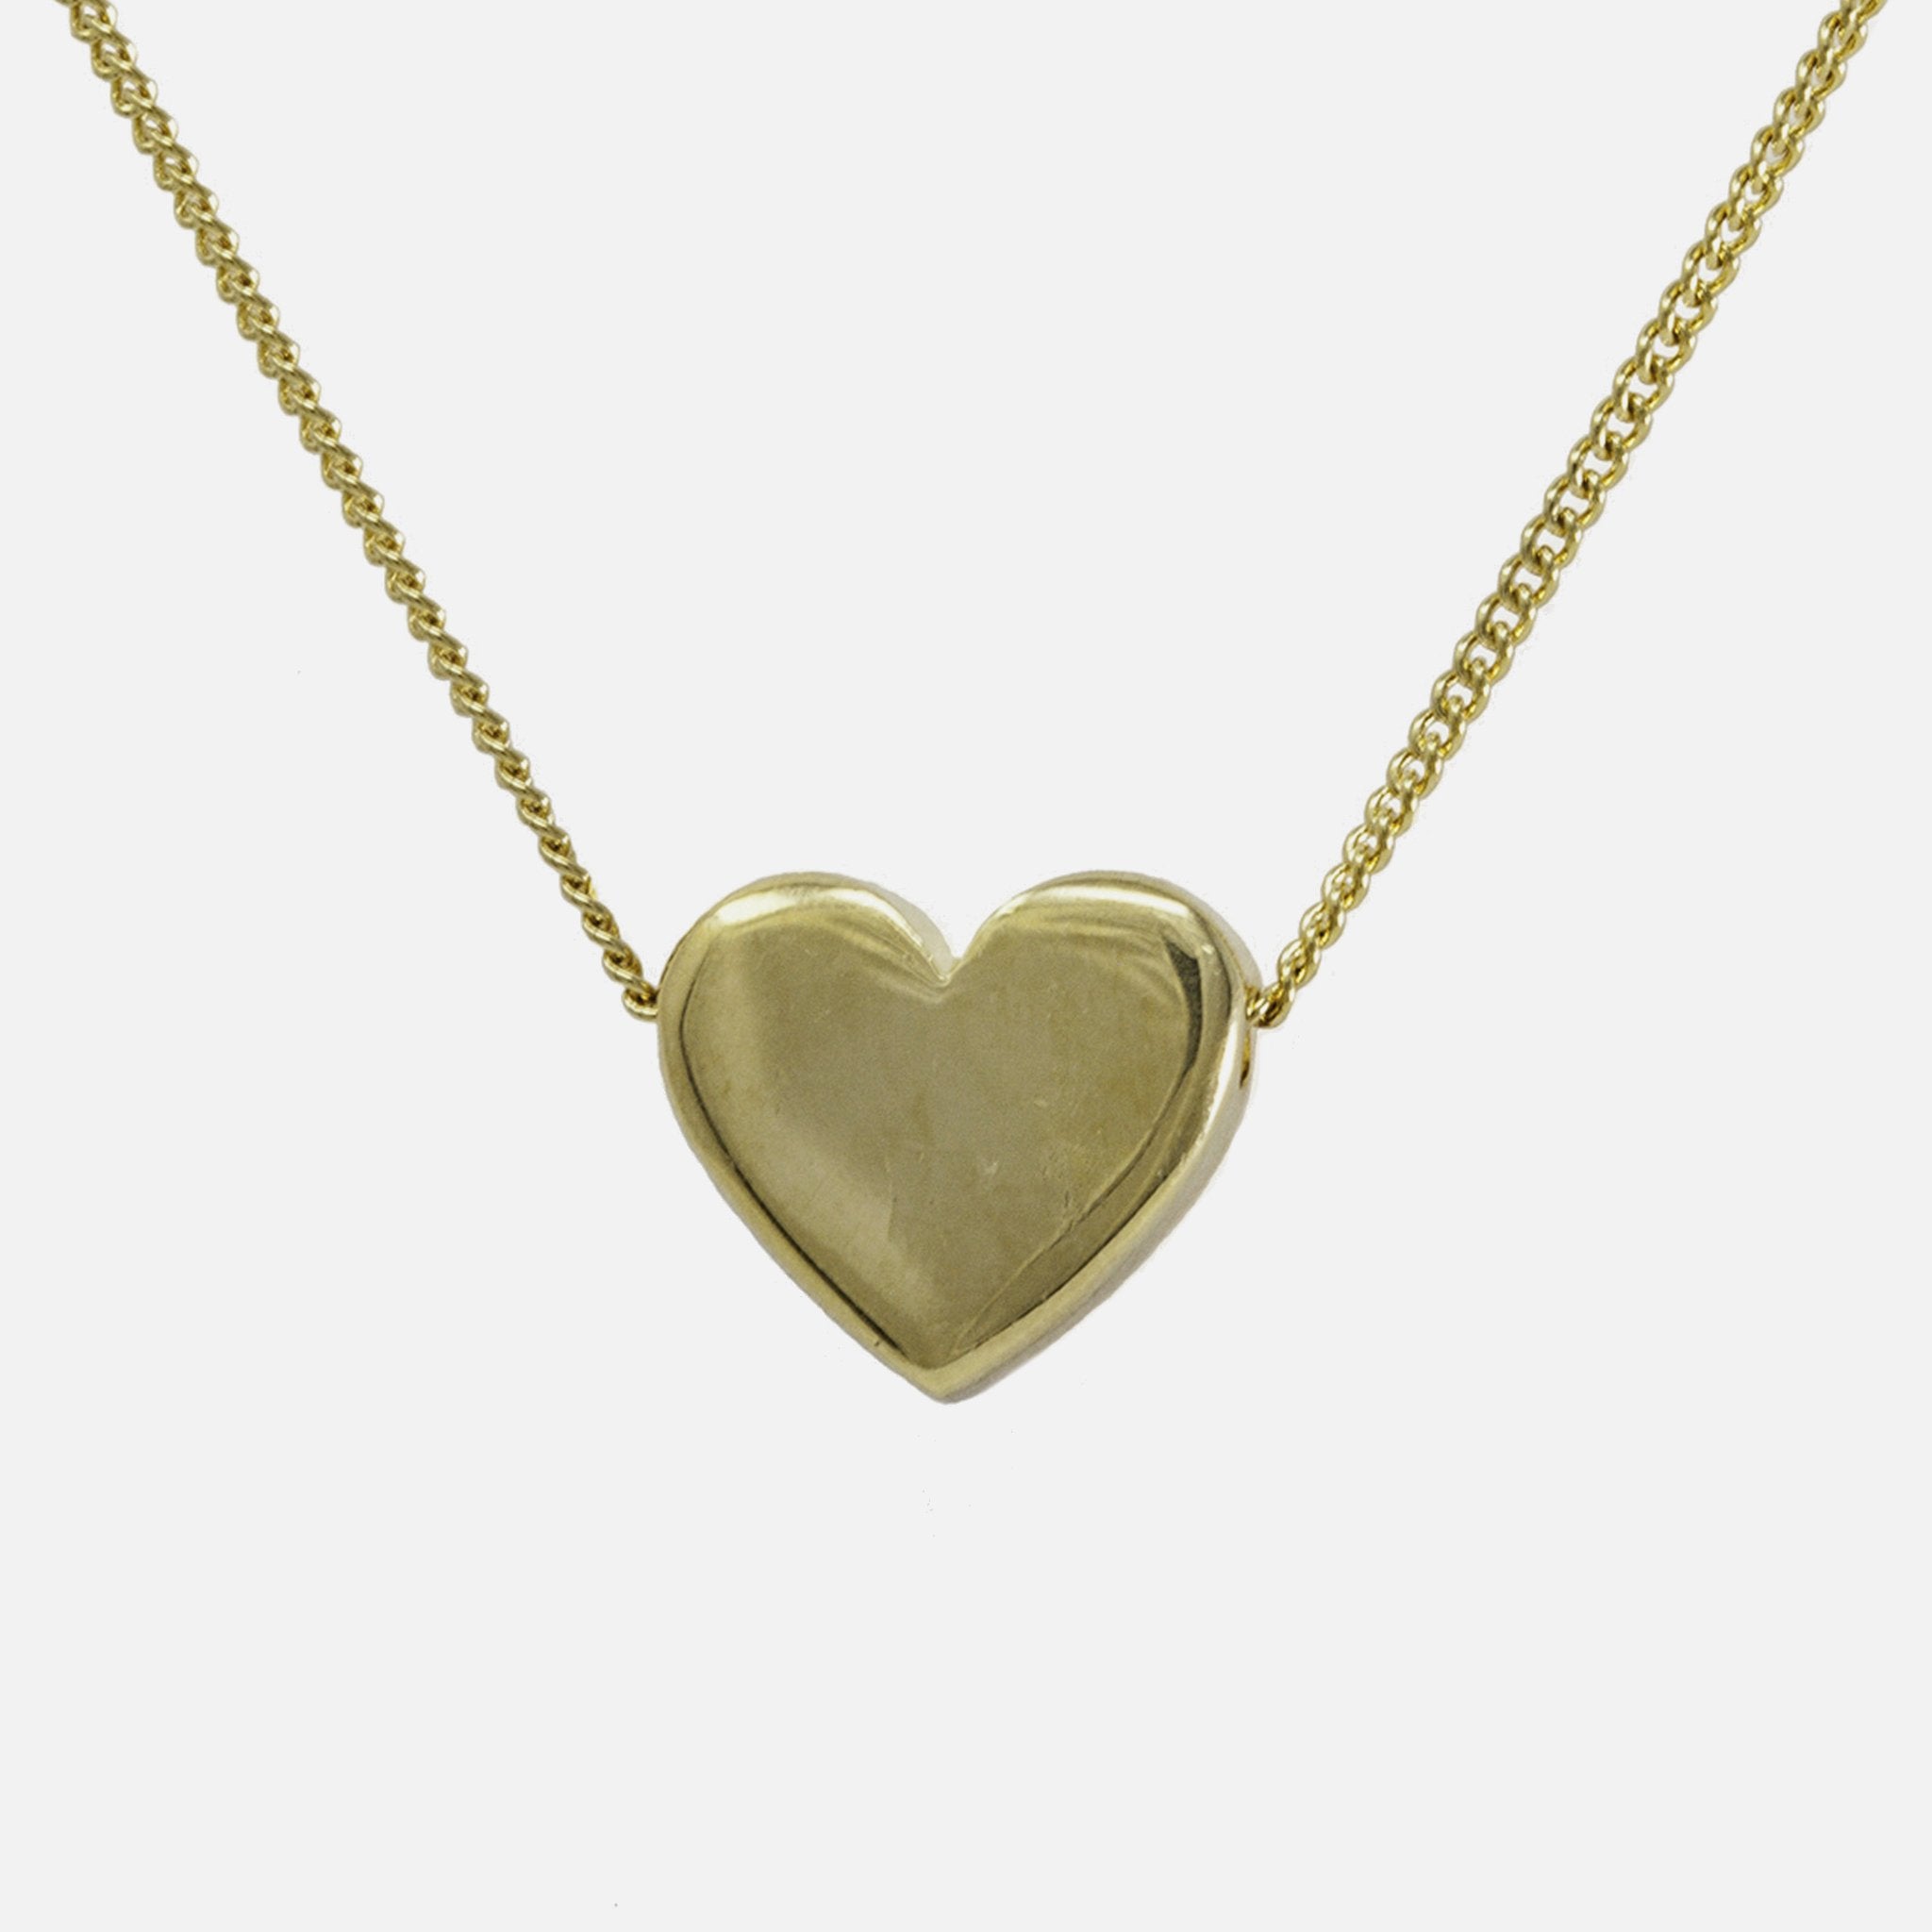 Adoring Sterling & Gold Plate Necklace